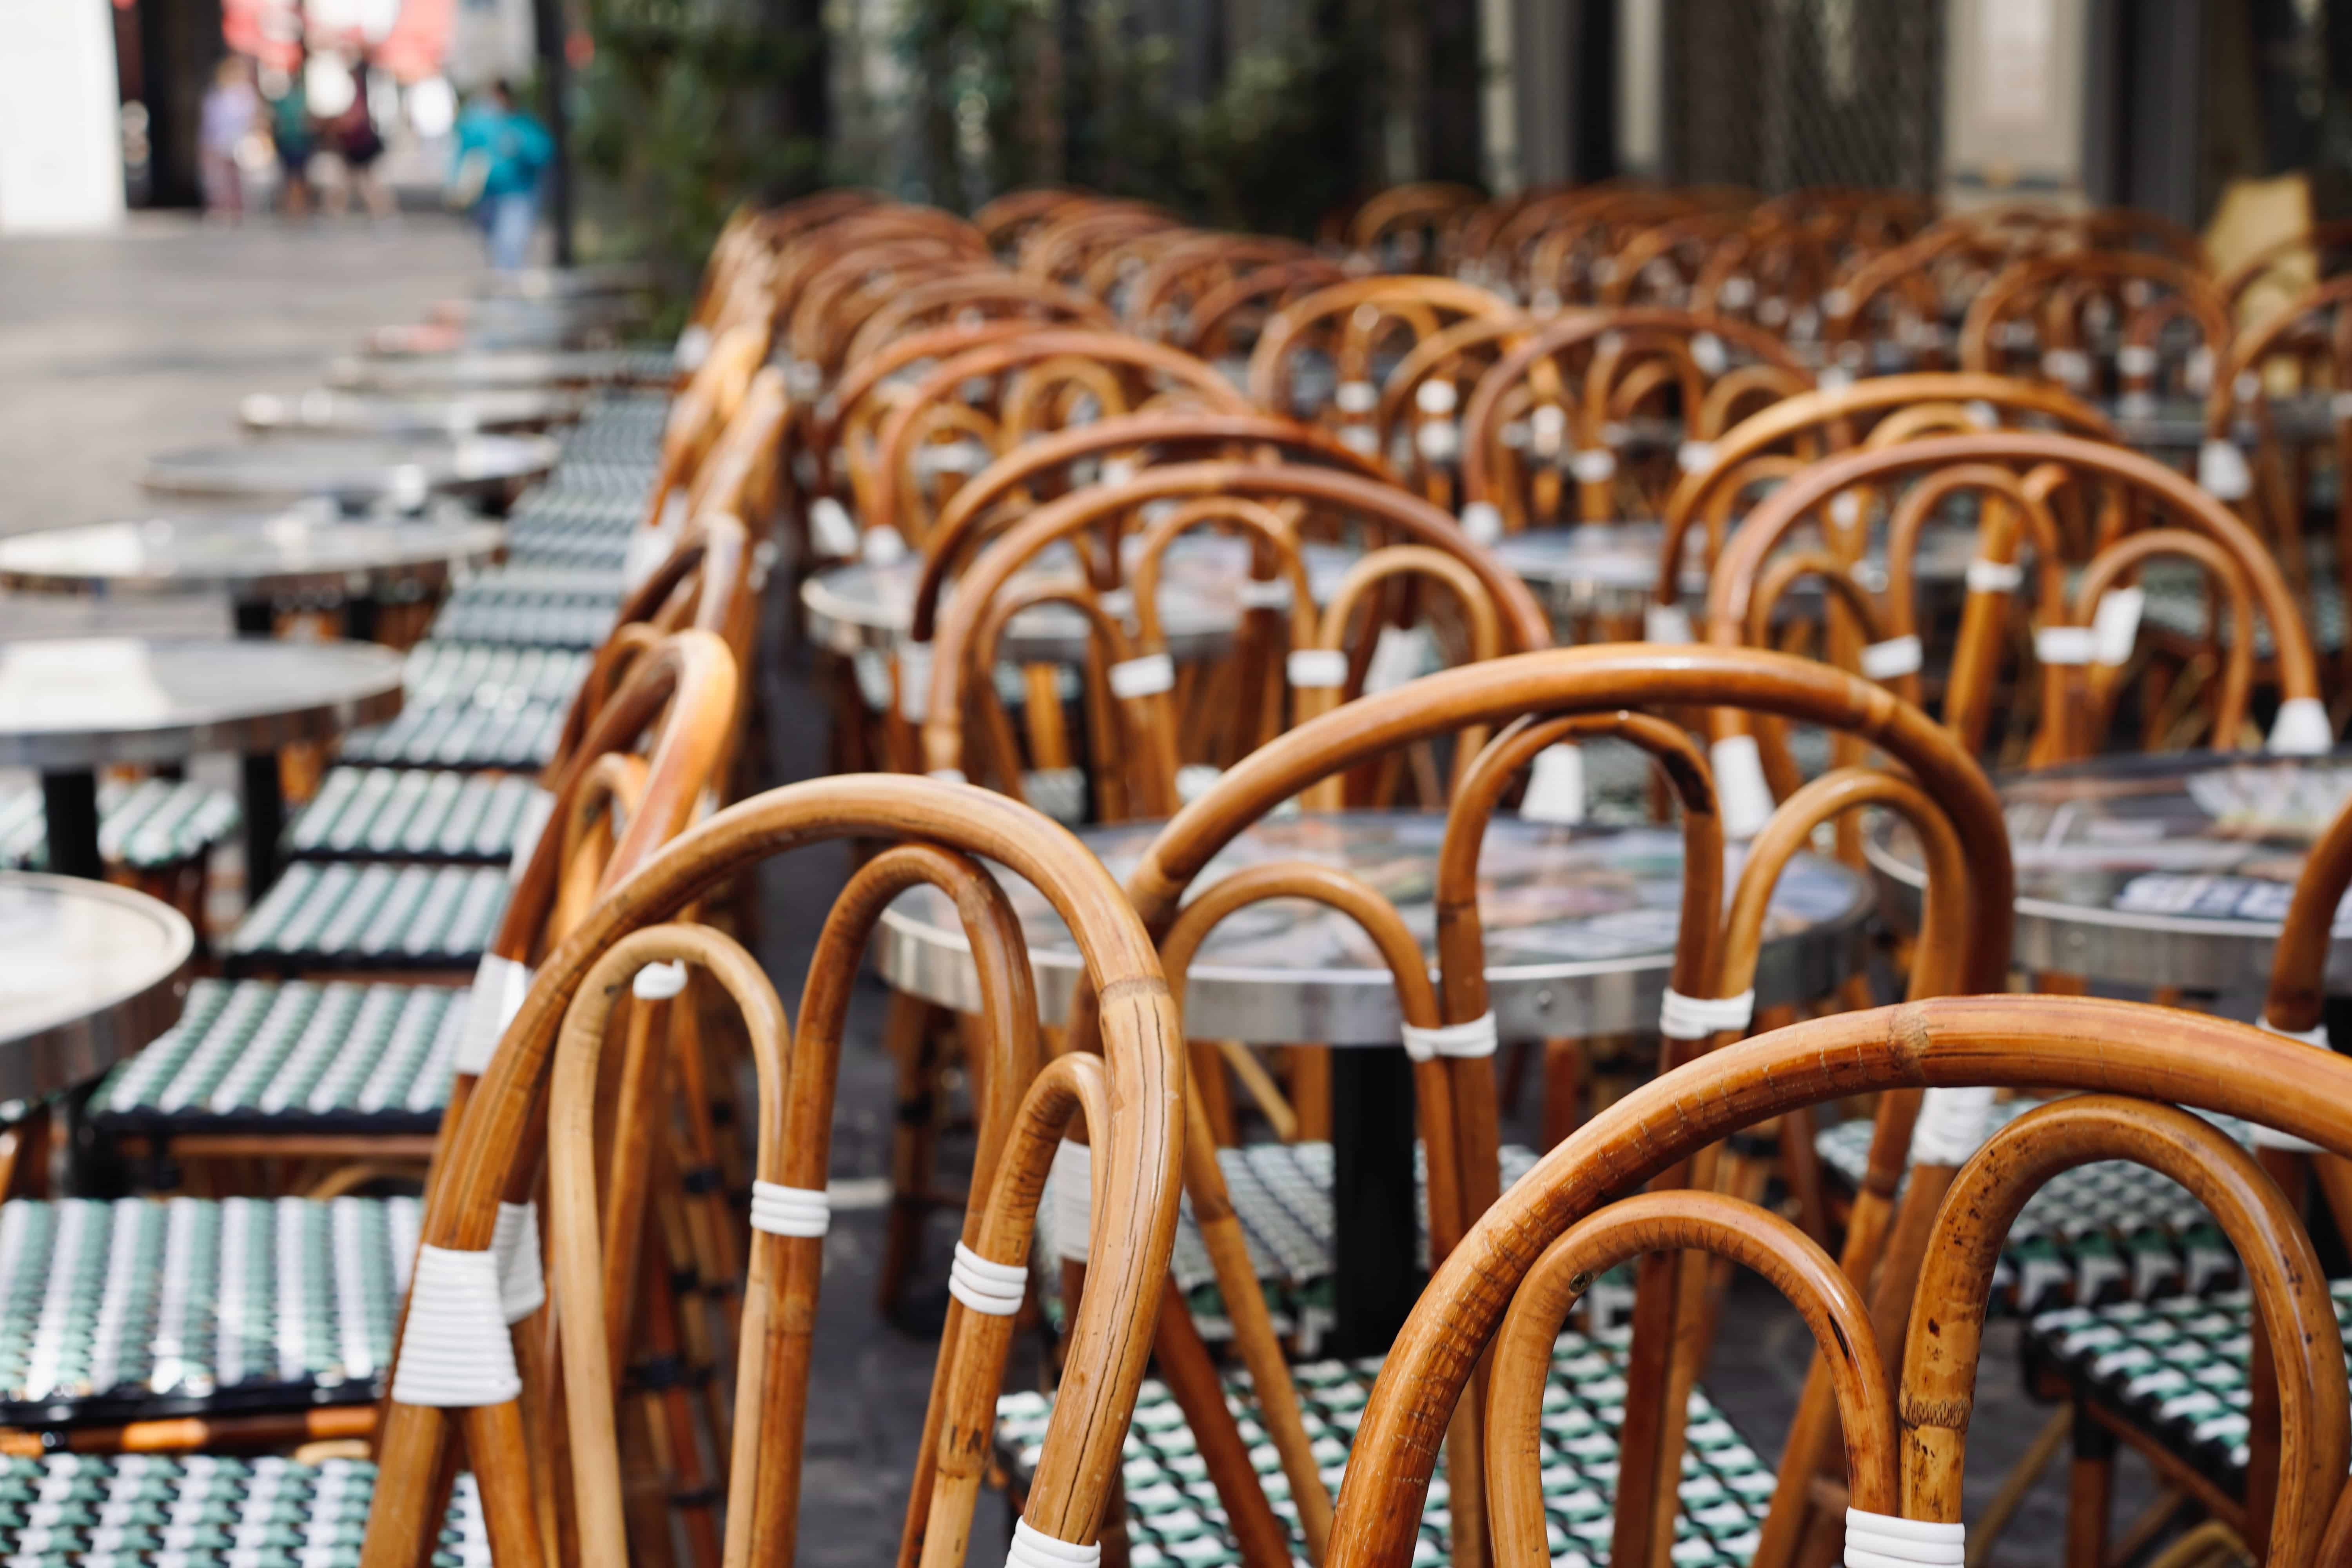 Cafe chairs waiting for guests in Paris